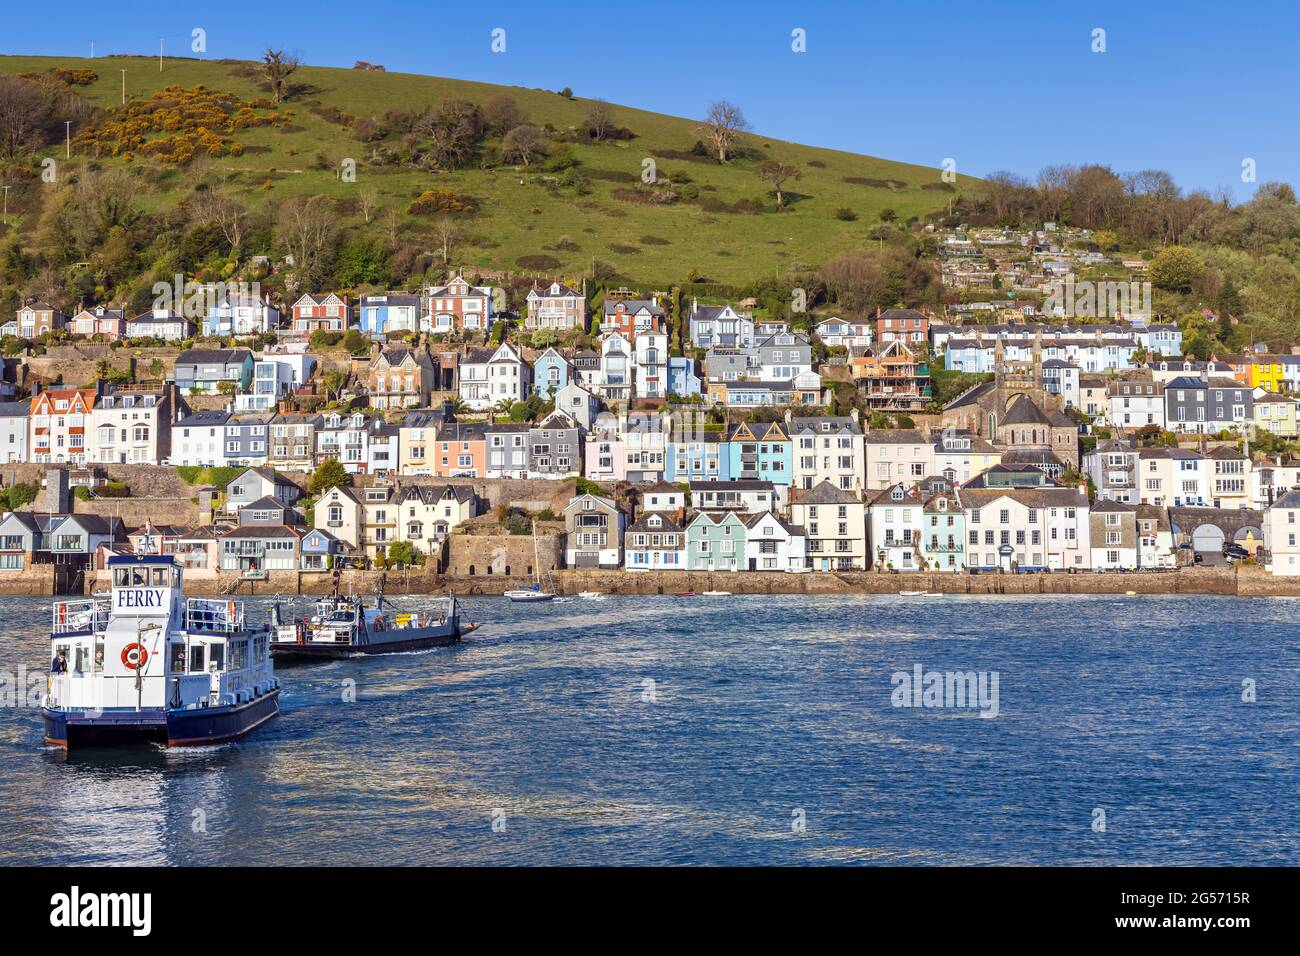 The lower Dart passenger and car ferries crossing the river Dart with the colourful buildings of Dartmouth in the background. Stock Photo